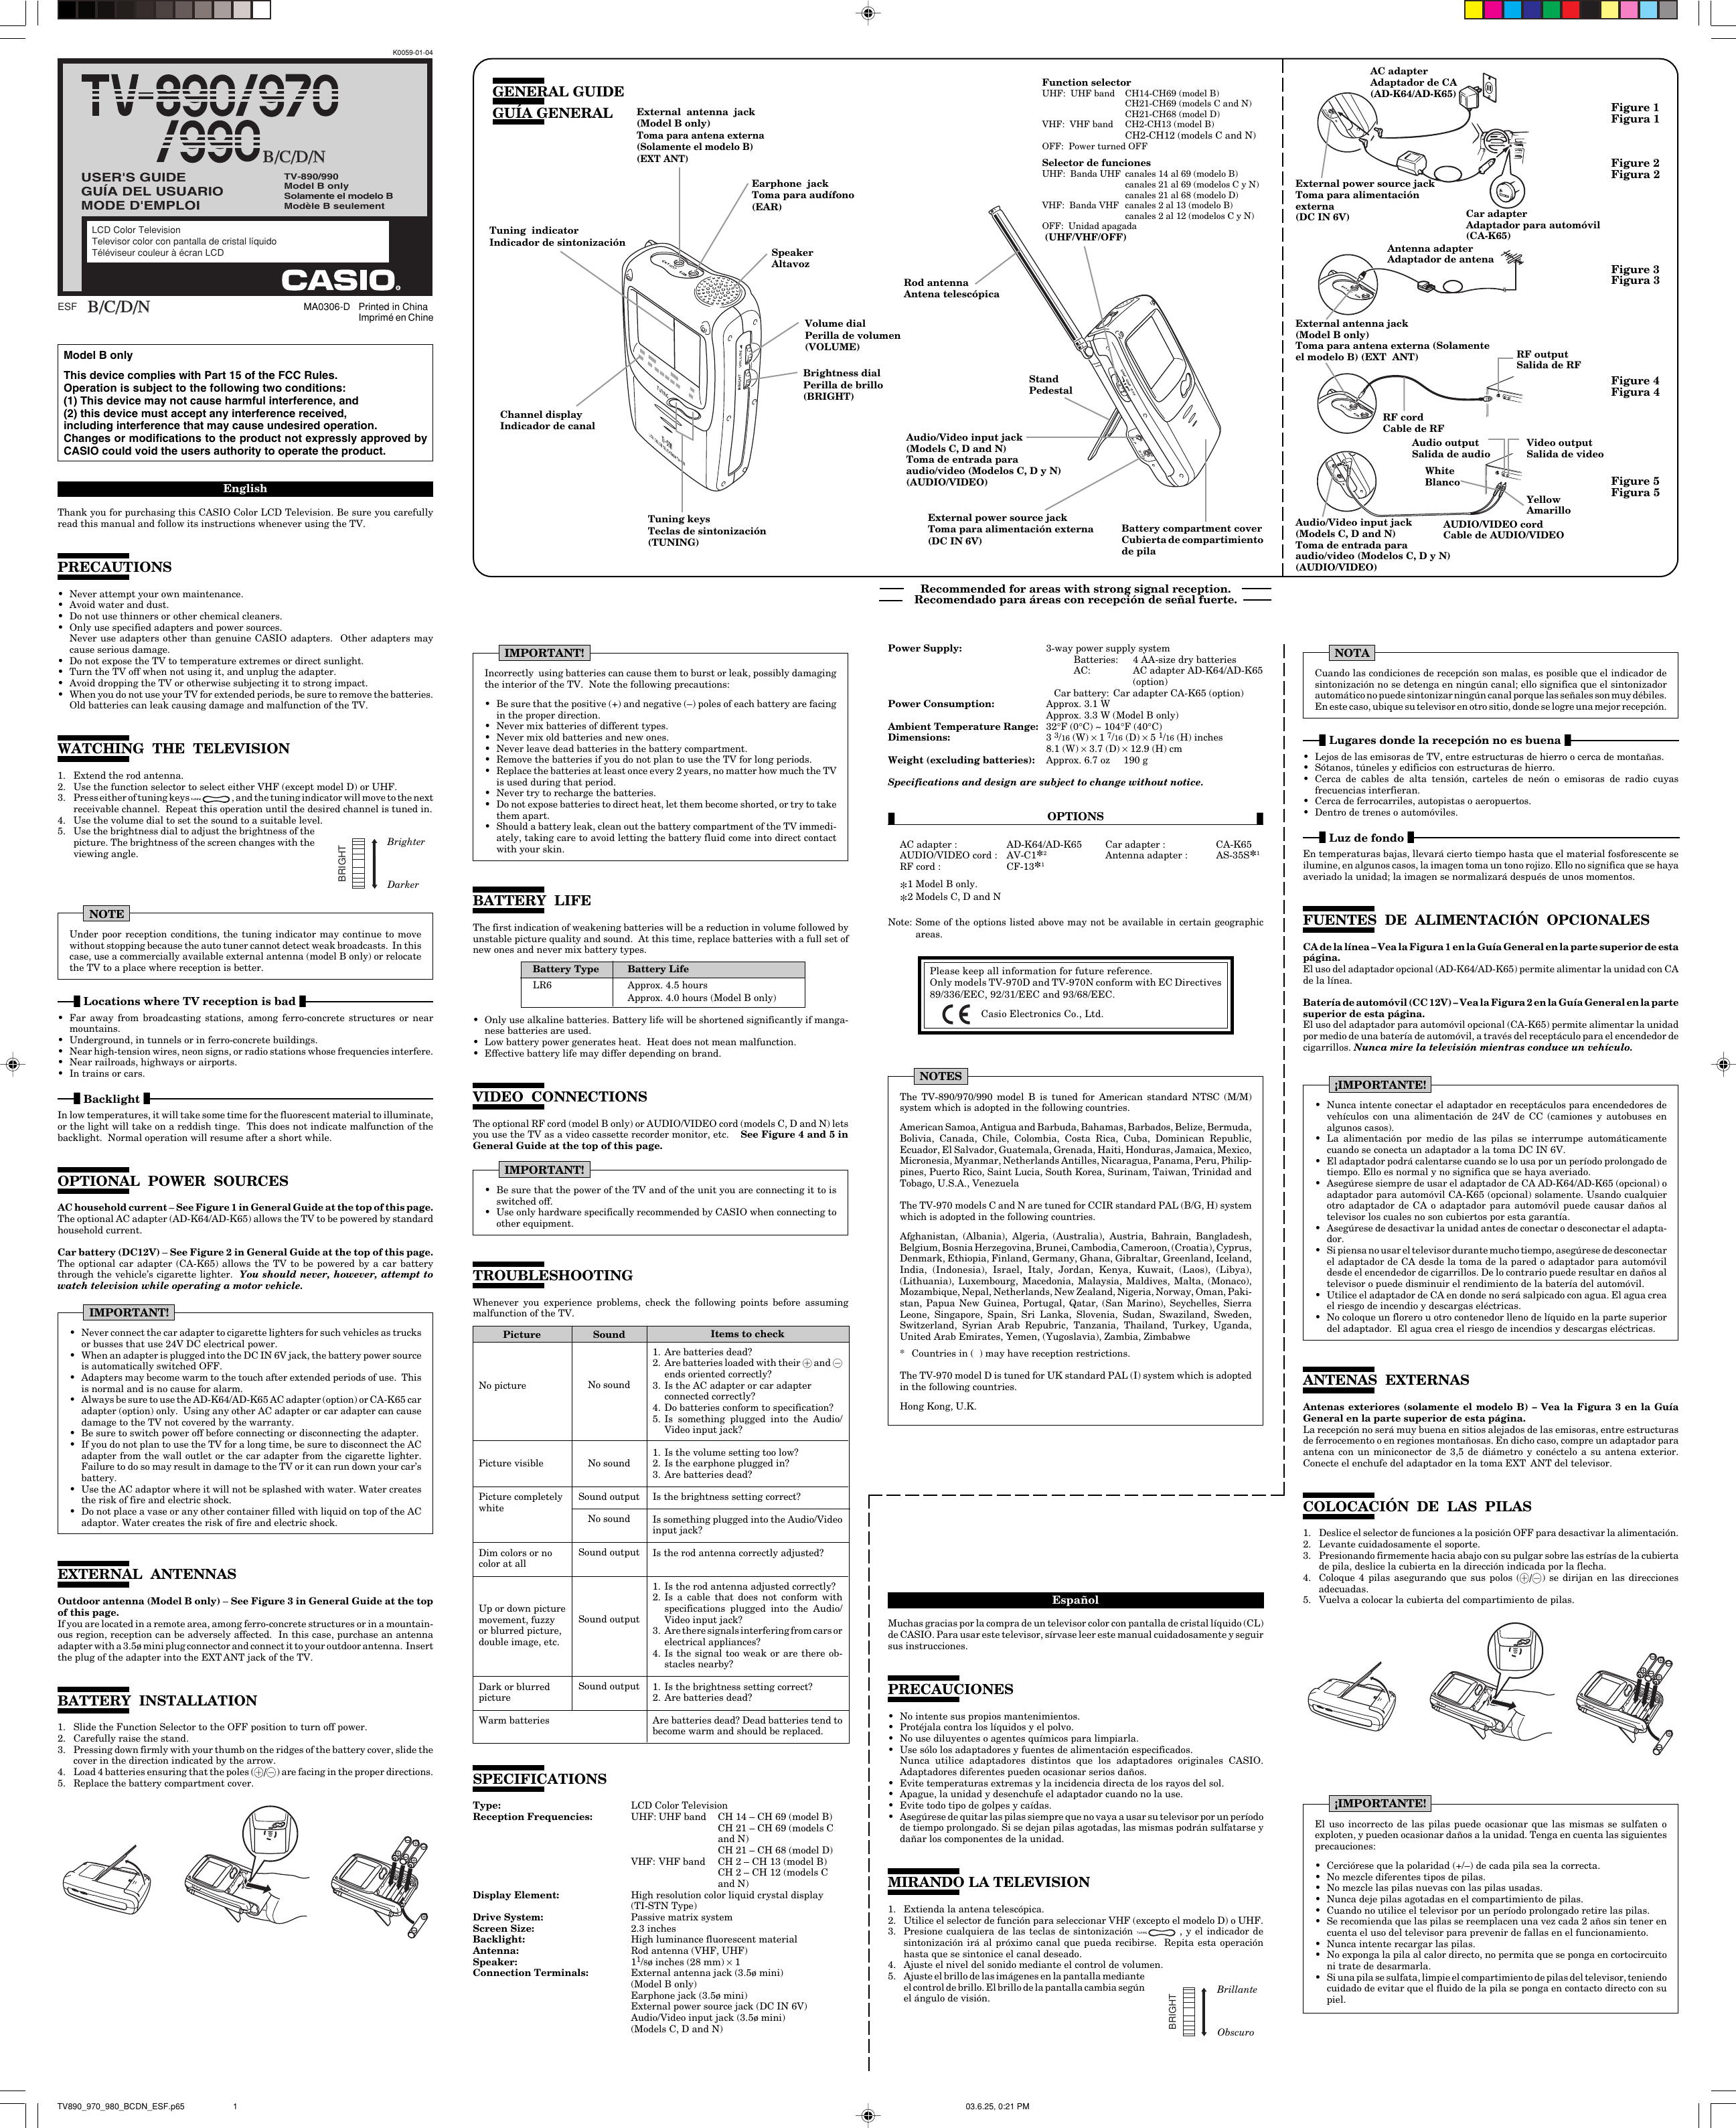 Page 1 of 2 - Casio Casio-Lcd-Color-Television-Tv-890-990-Users-Manual-  Casio-lcd-color-television-tv-890-990-users-manual